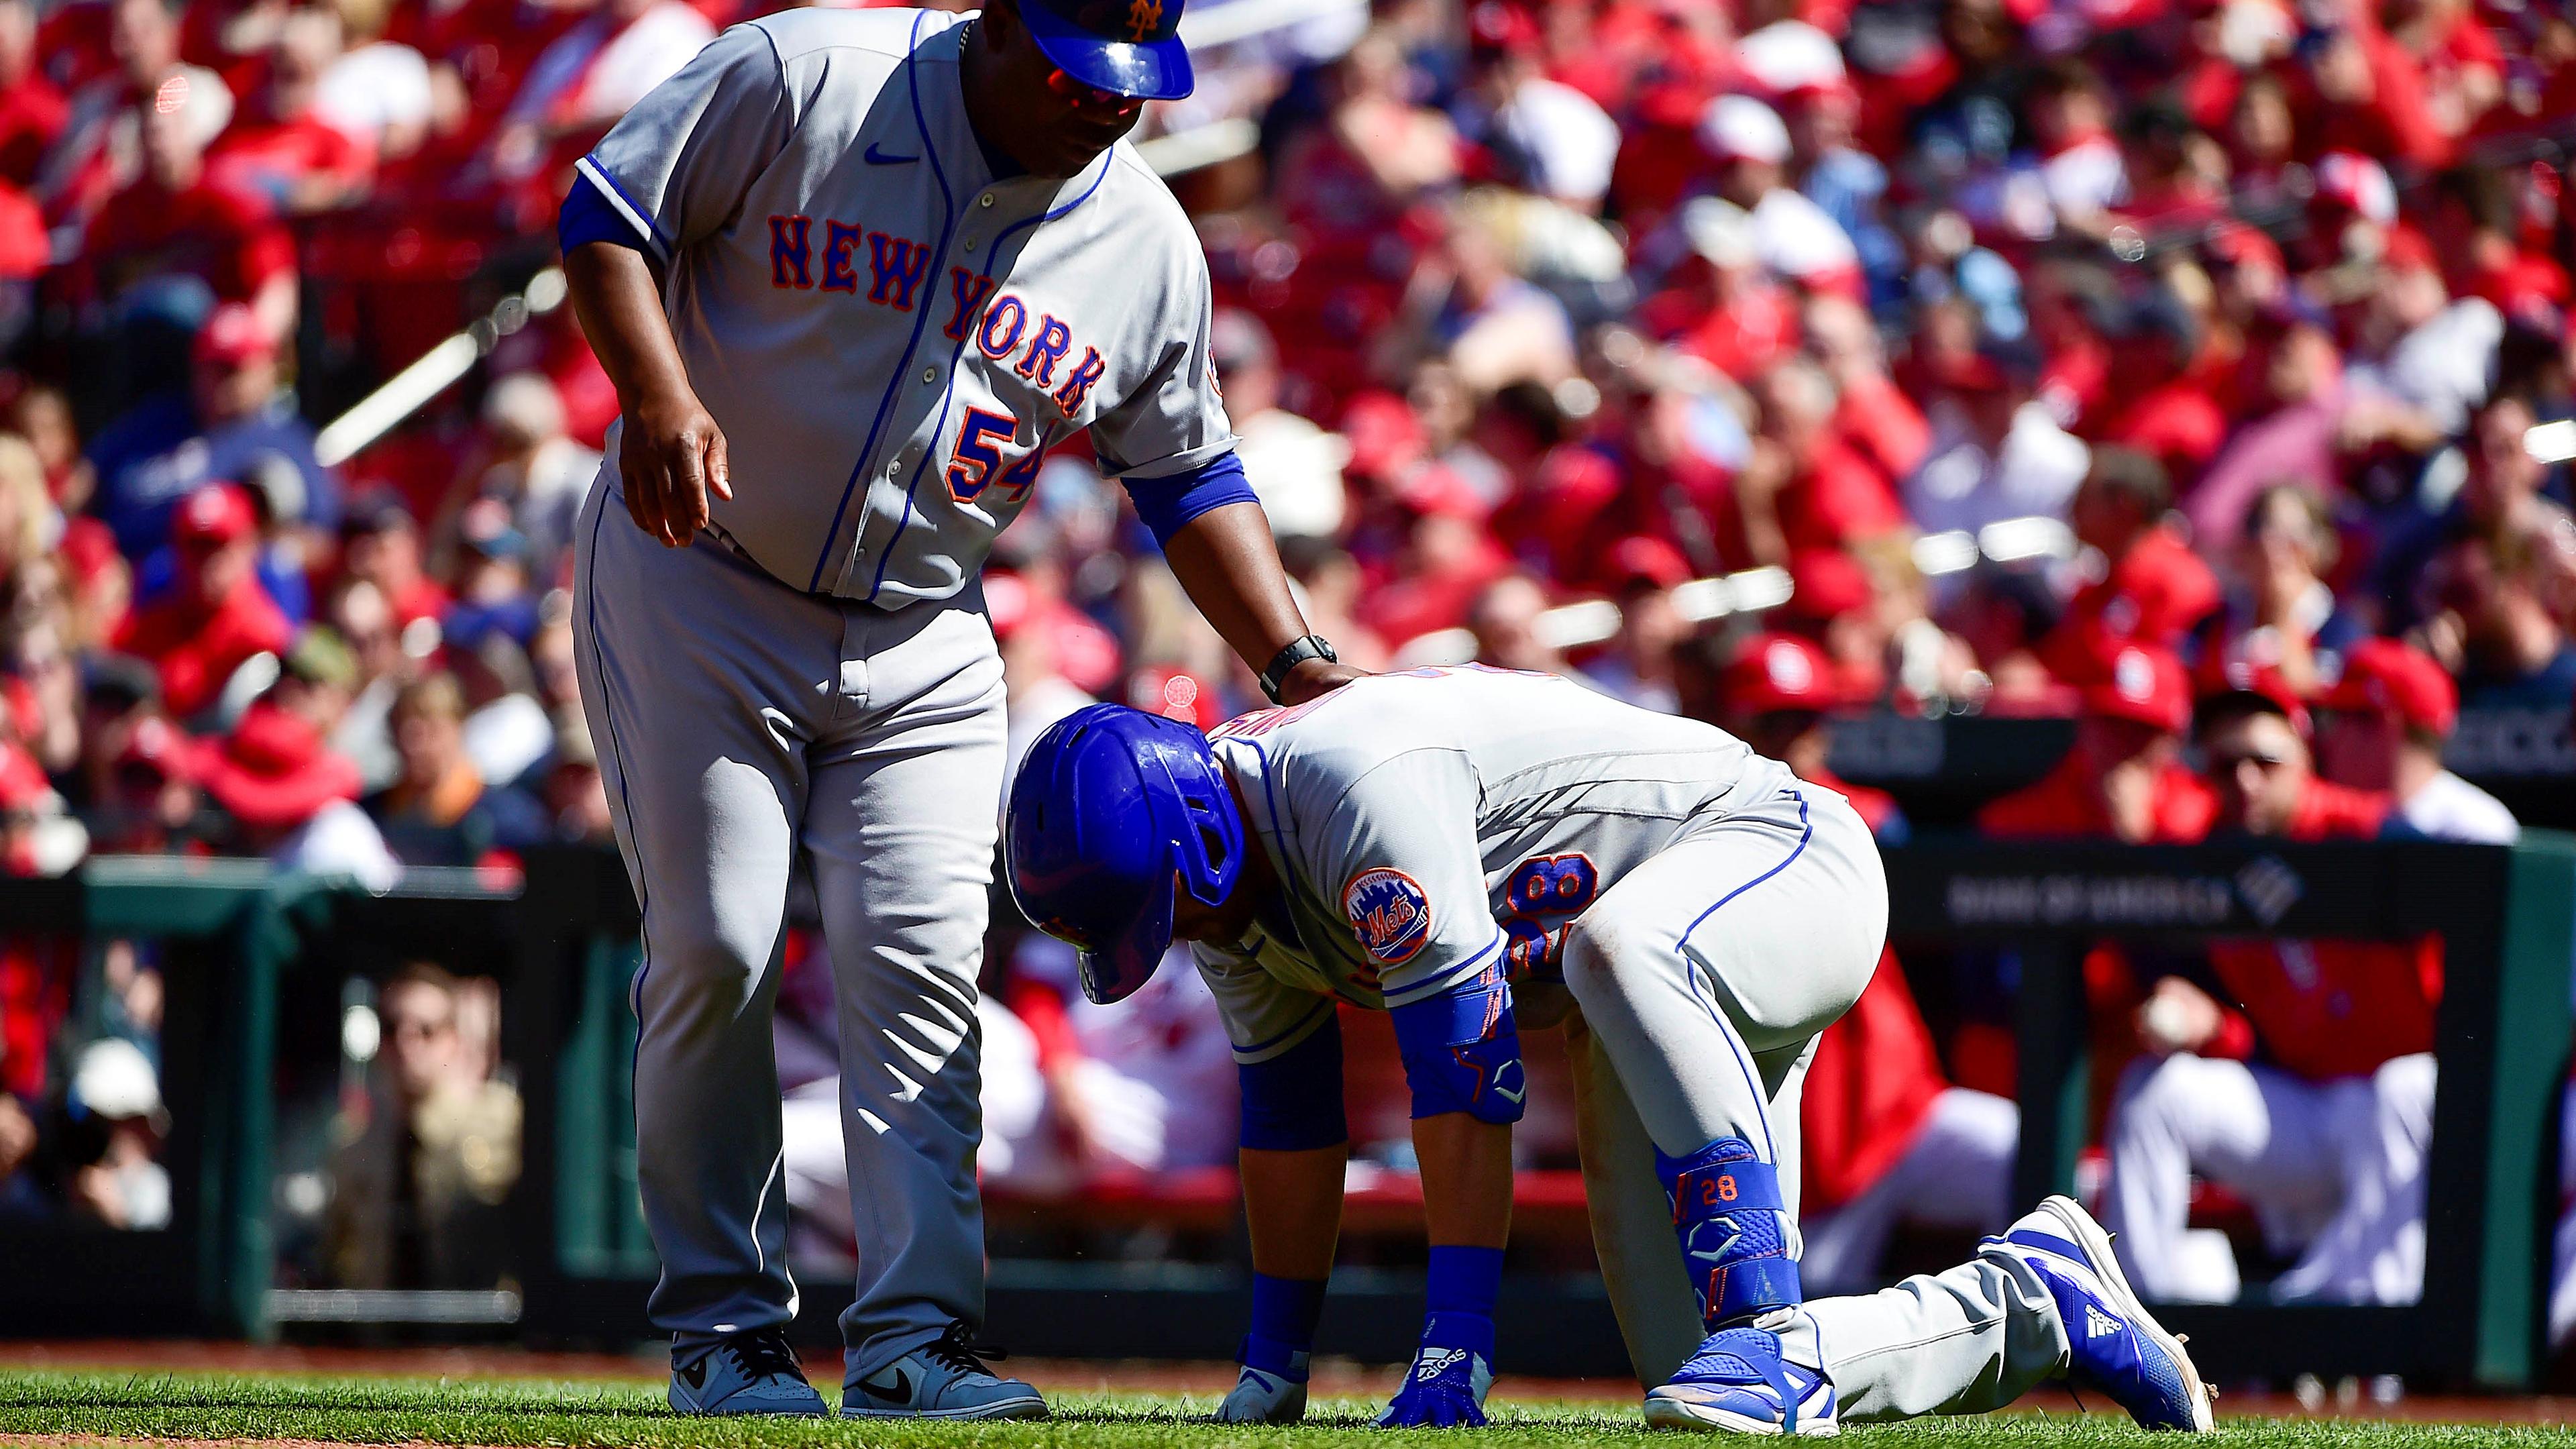 New York Mets third baseman J.D. Davis (28) is checked on by first base coach Wayne Kirby (54) after he was hit in the foot by a pitch / Jeff Curry- USA TODAY Sports